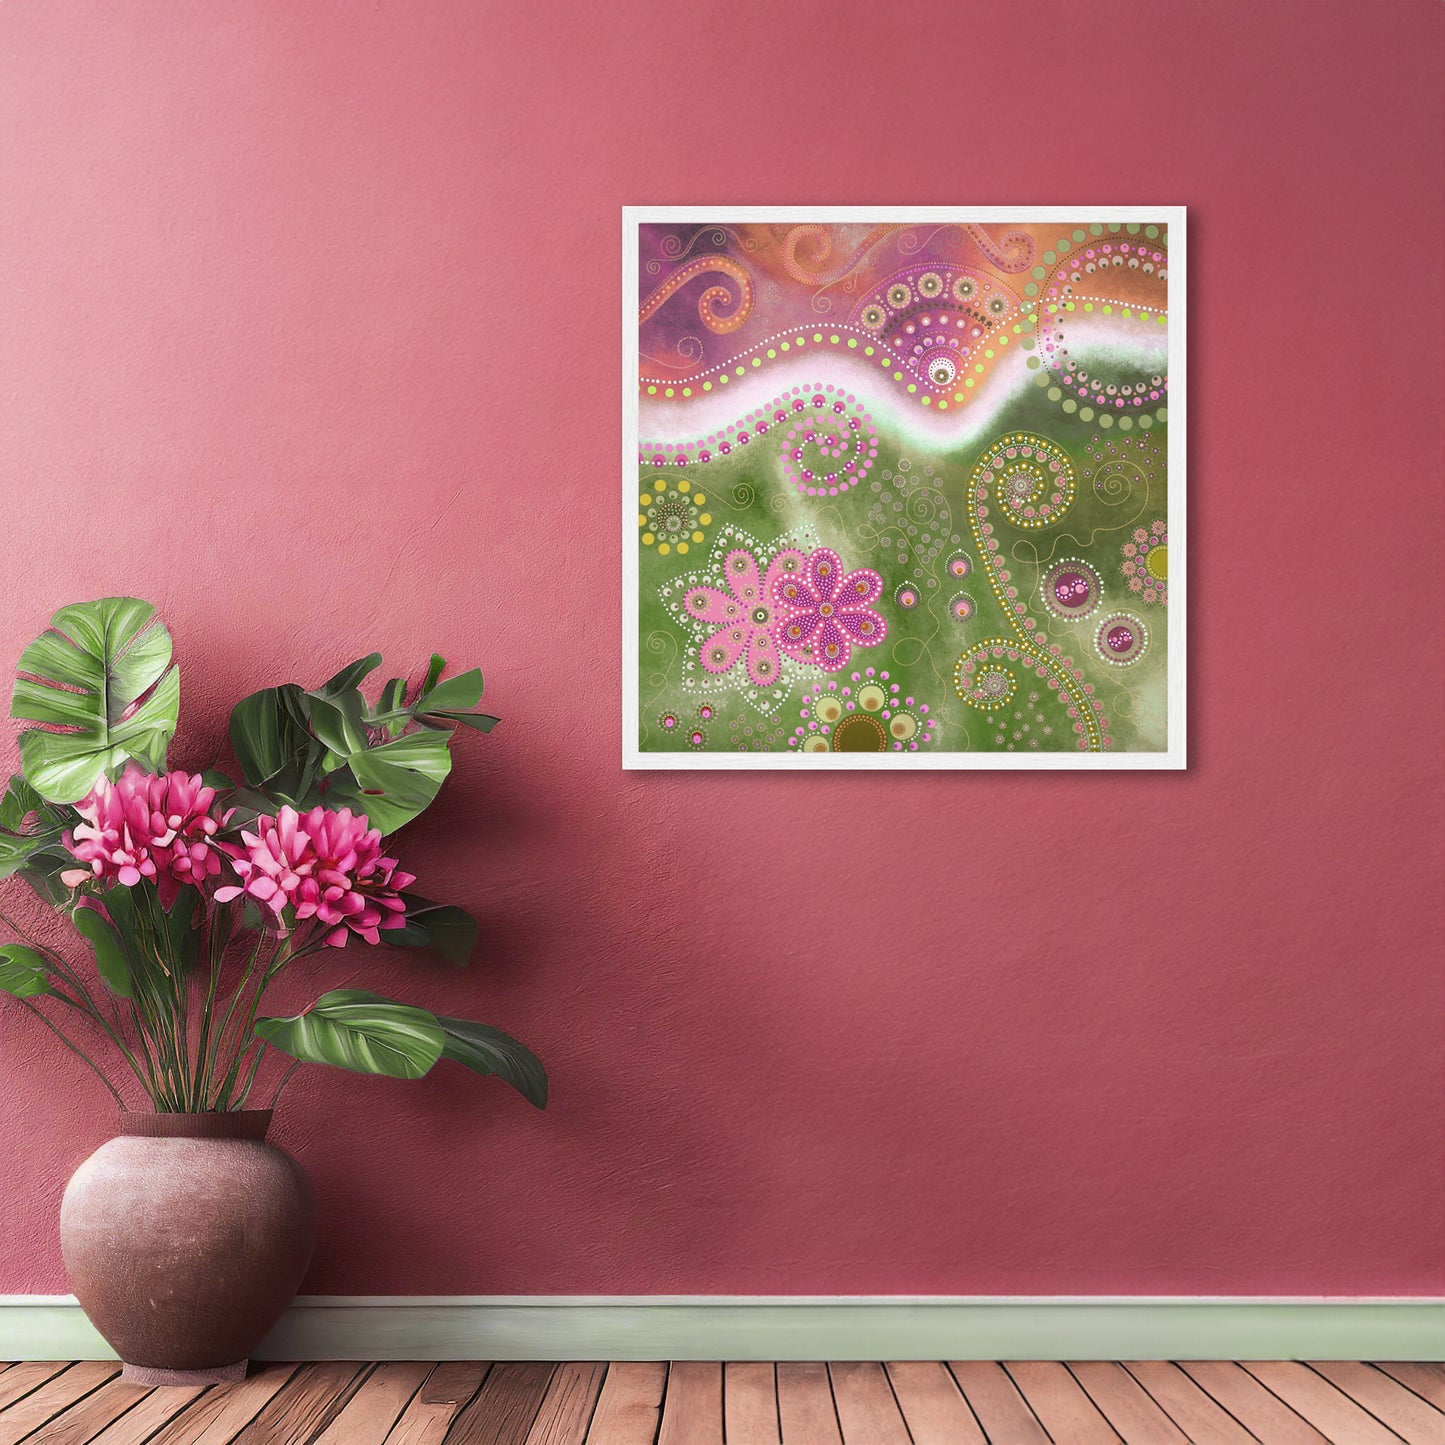 "The Happiness inside" - Pastel Dream - by Fanny Fay Engström